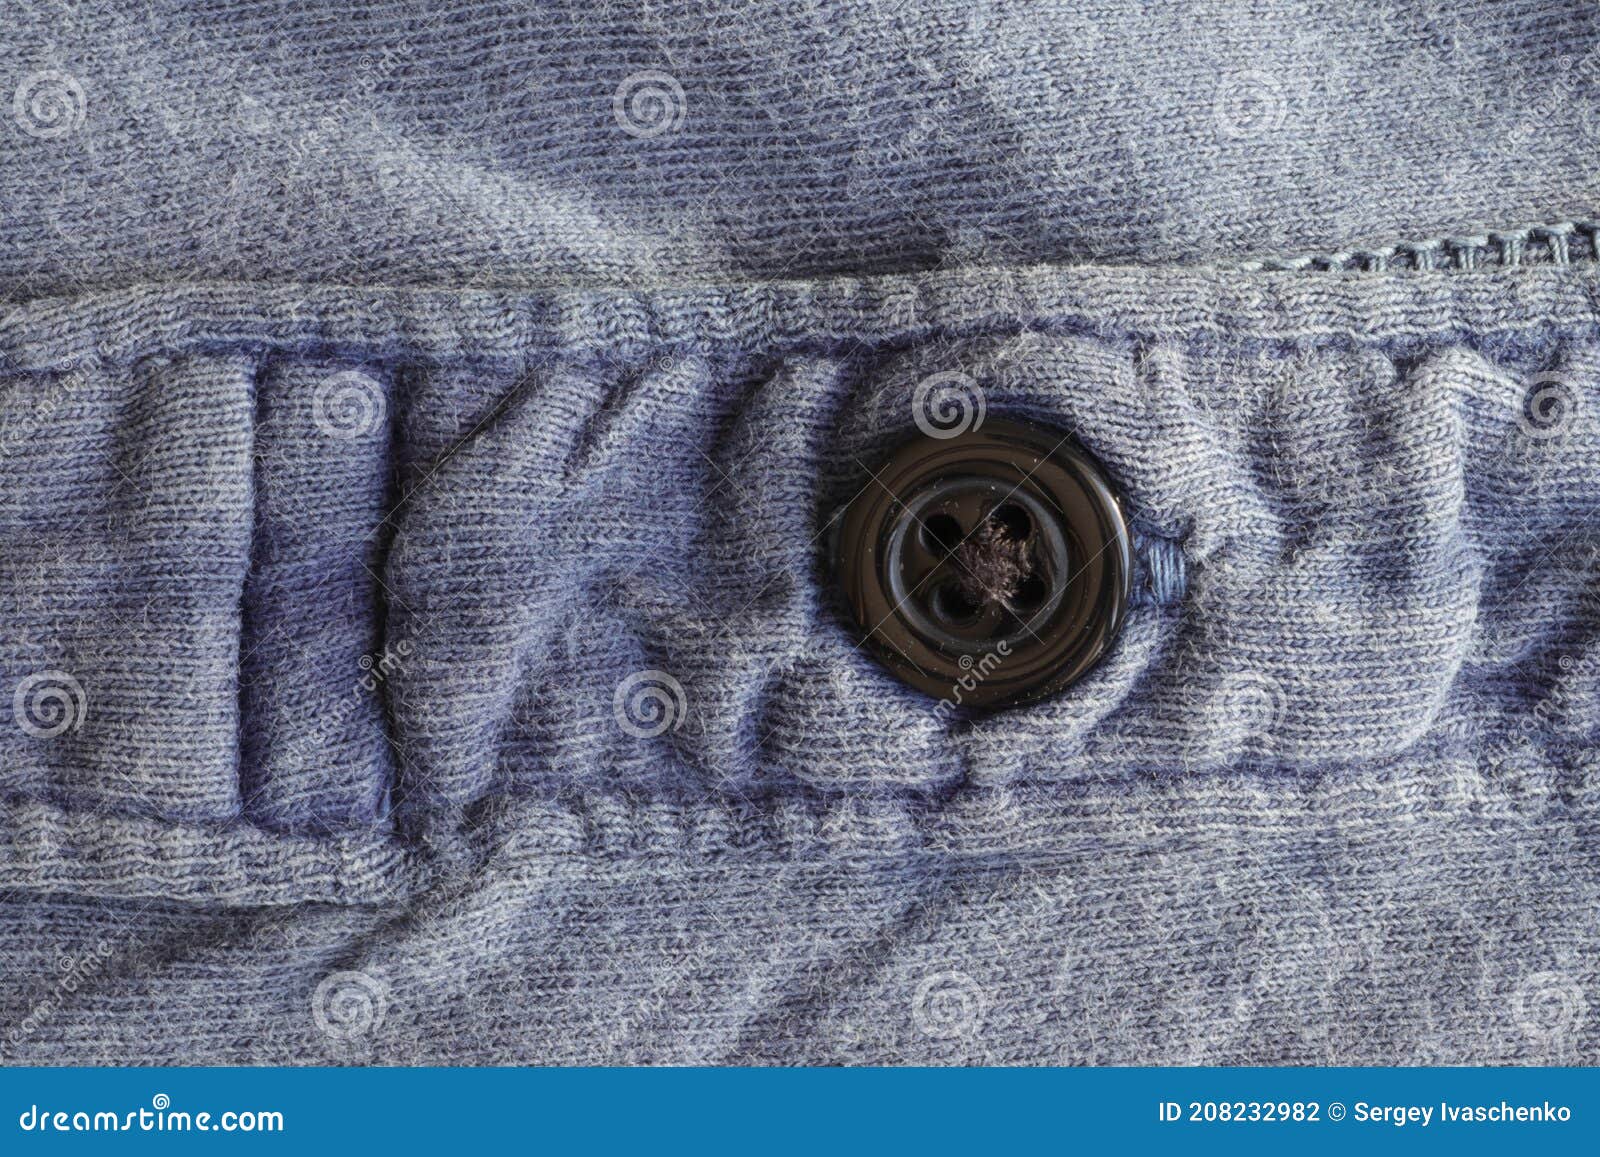 The Texture of the Fabric with a Button. Stock Photo - Image of ...